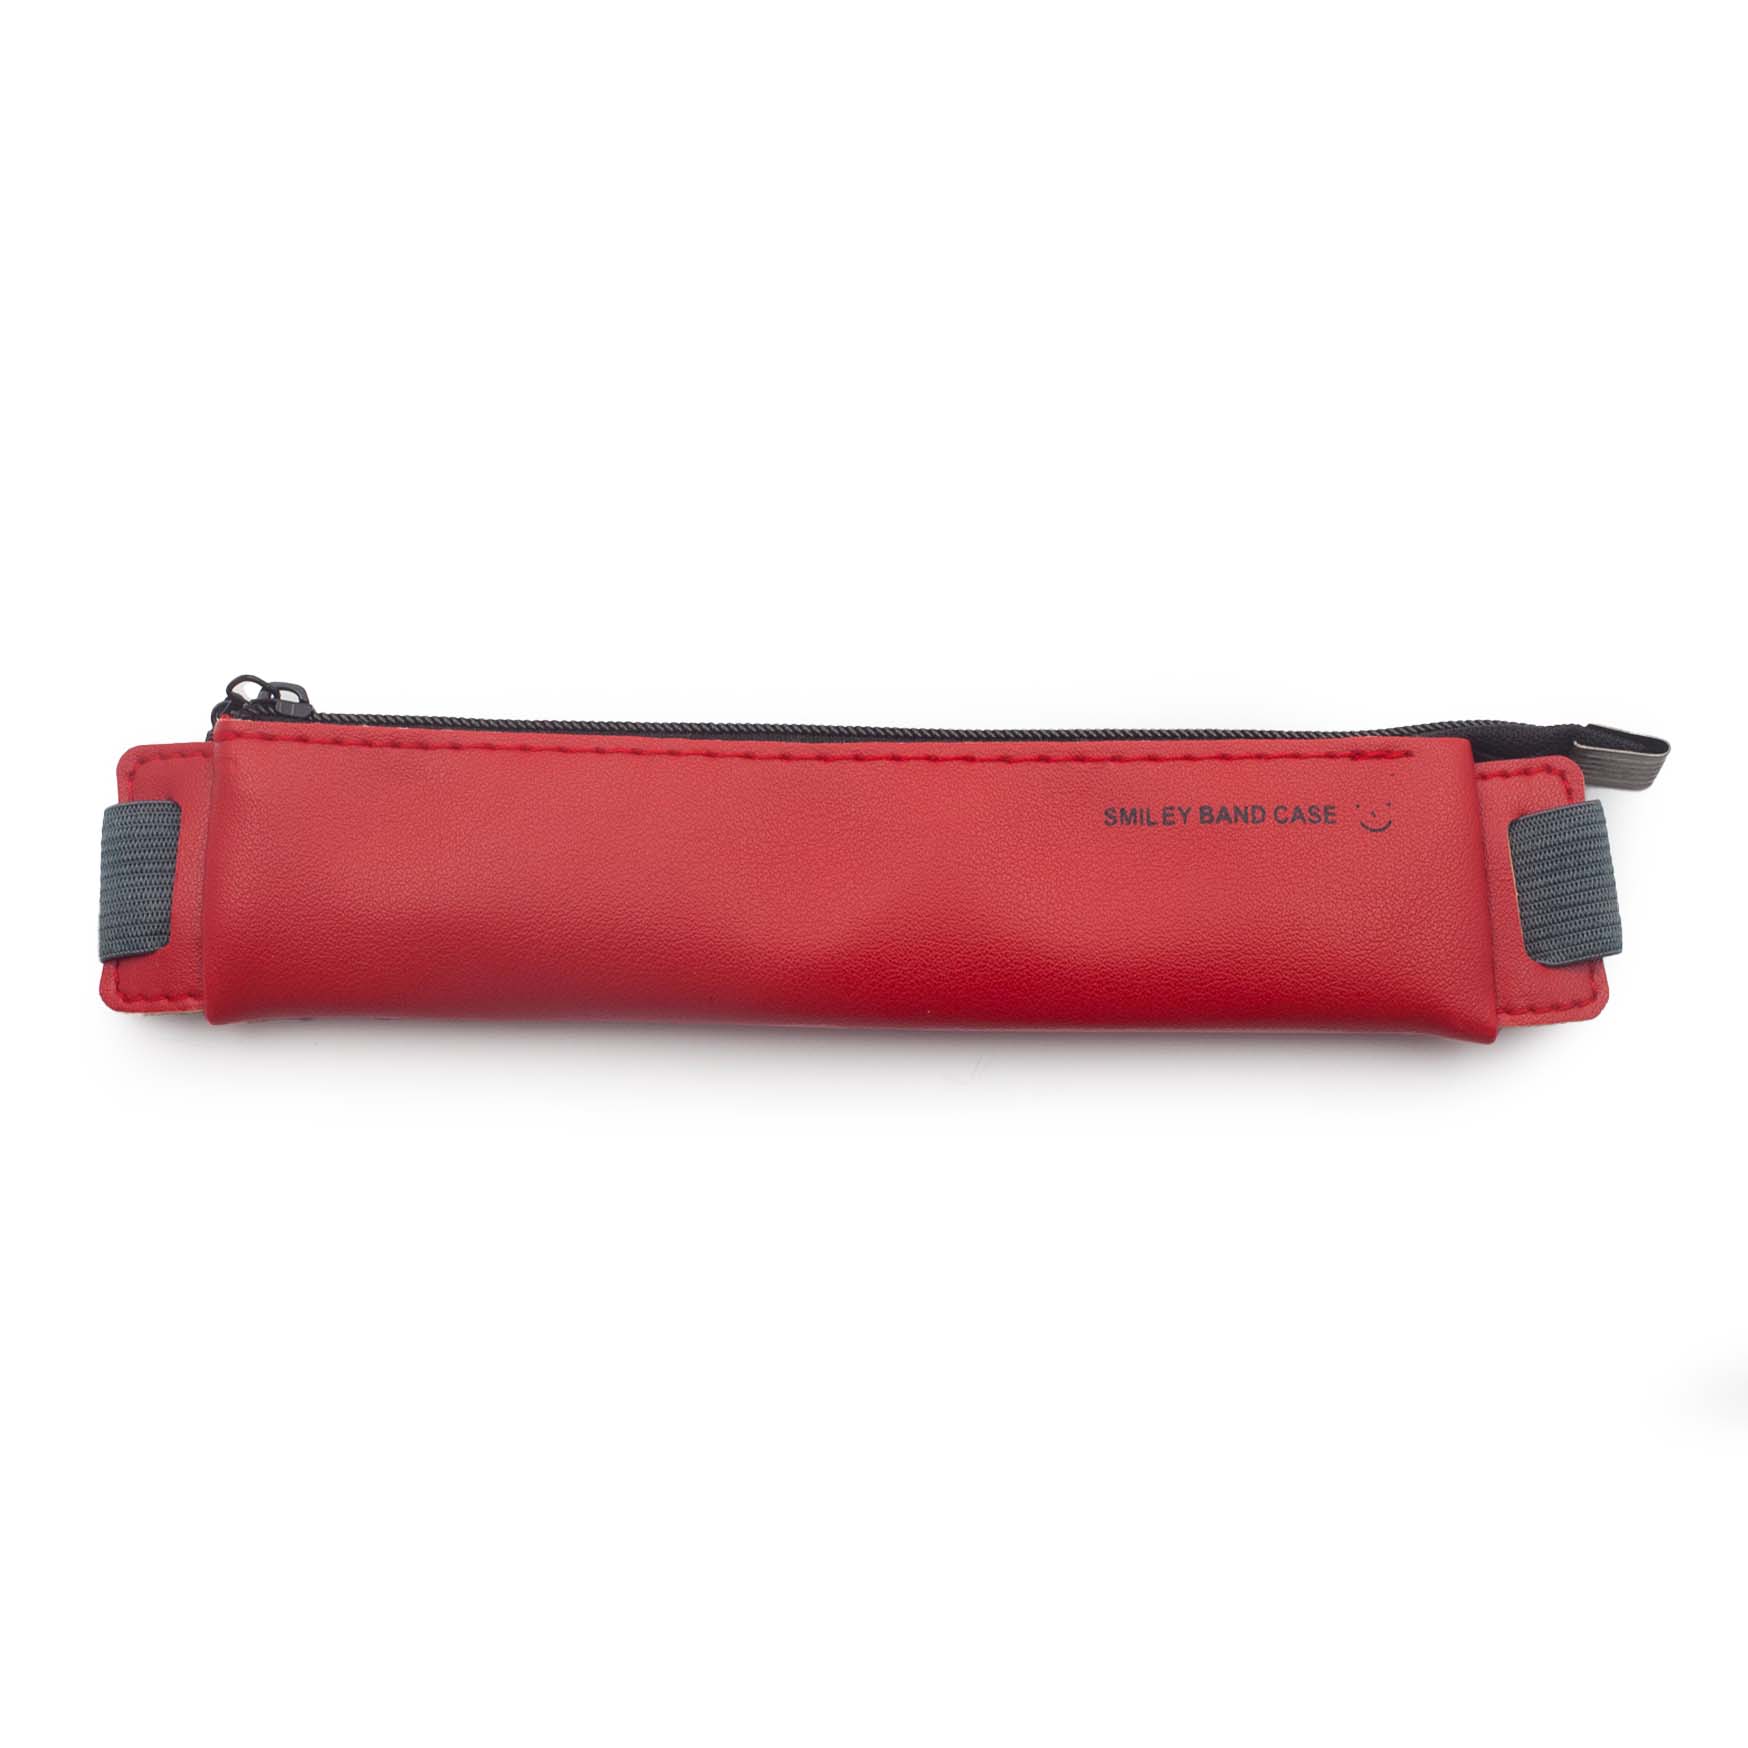 Image shows a red diary/pencil pouch